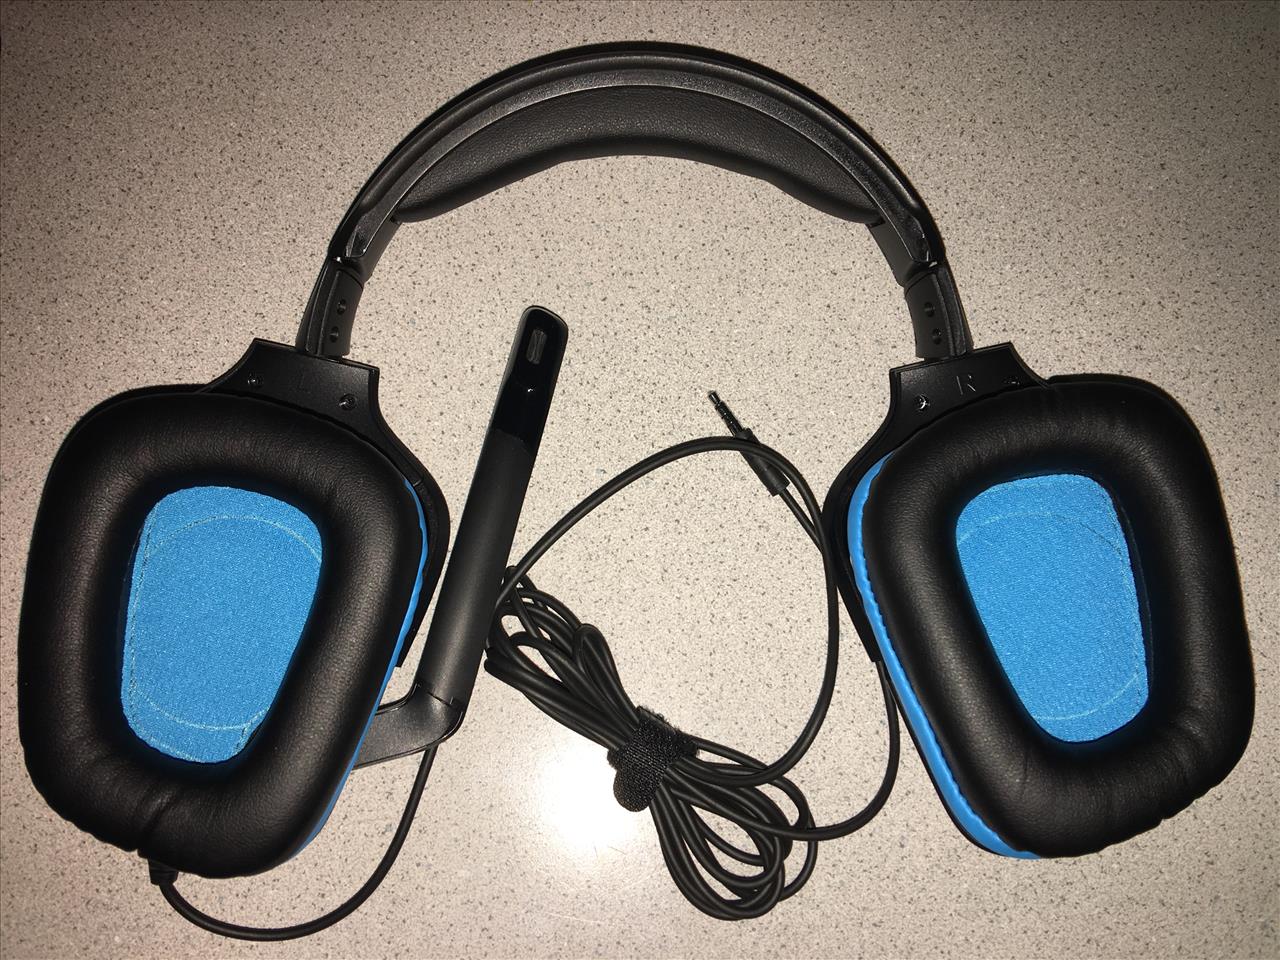 Logitech G432 Headphone Review and Mic Test 